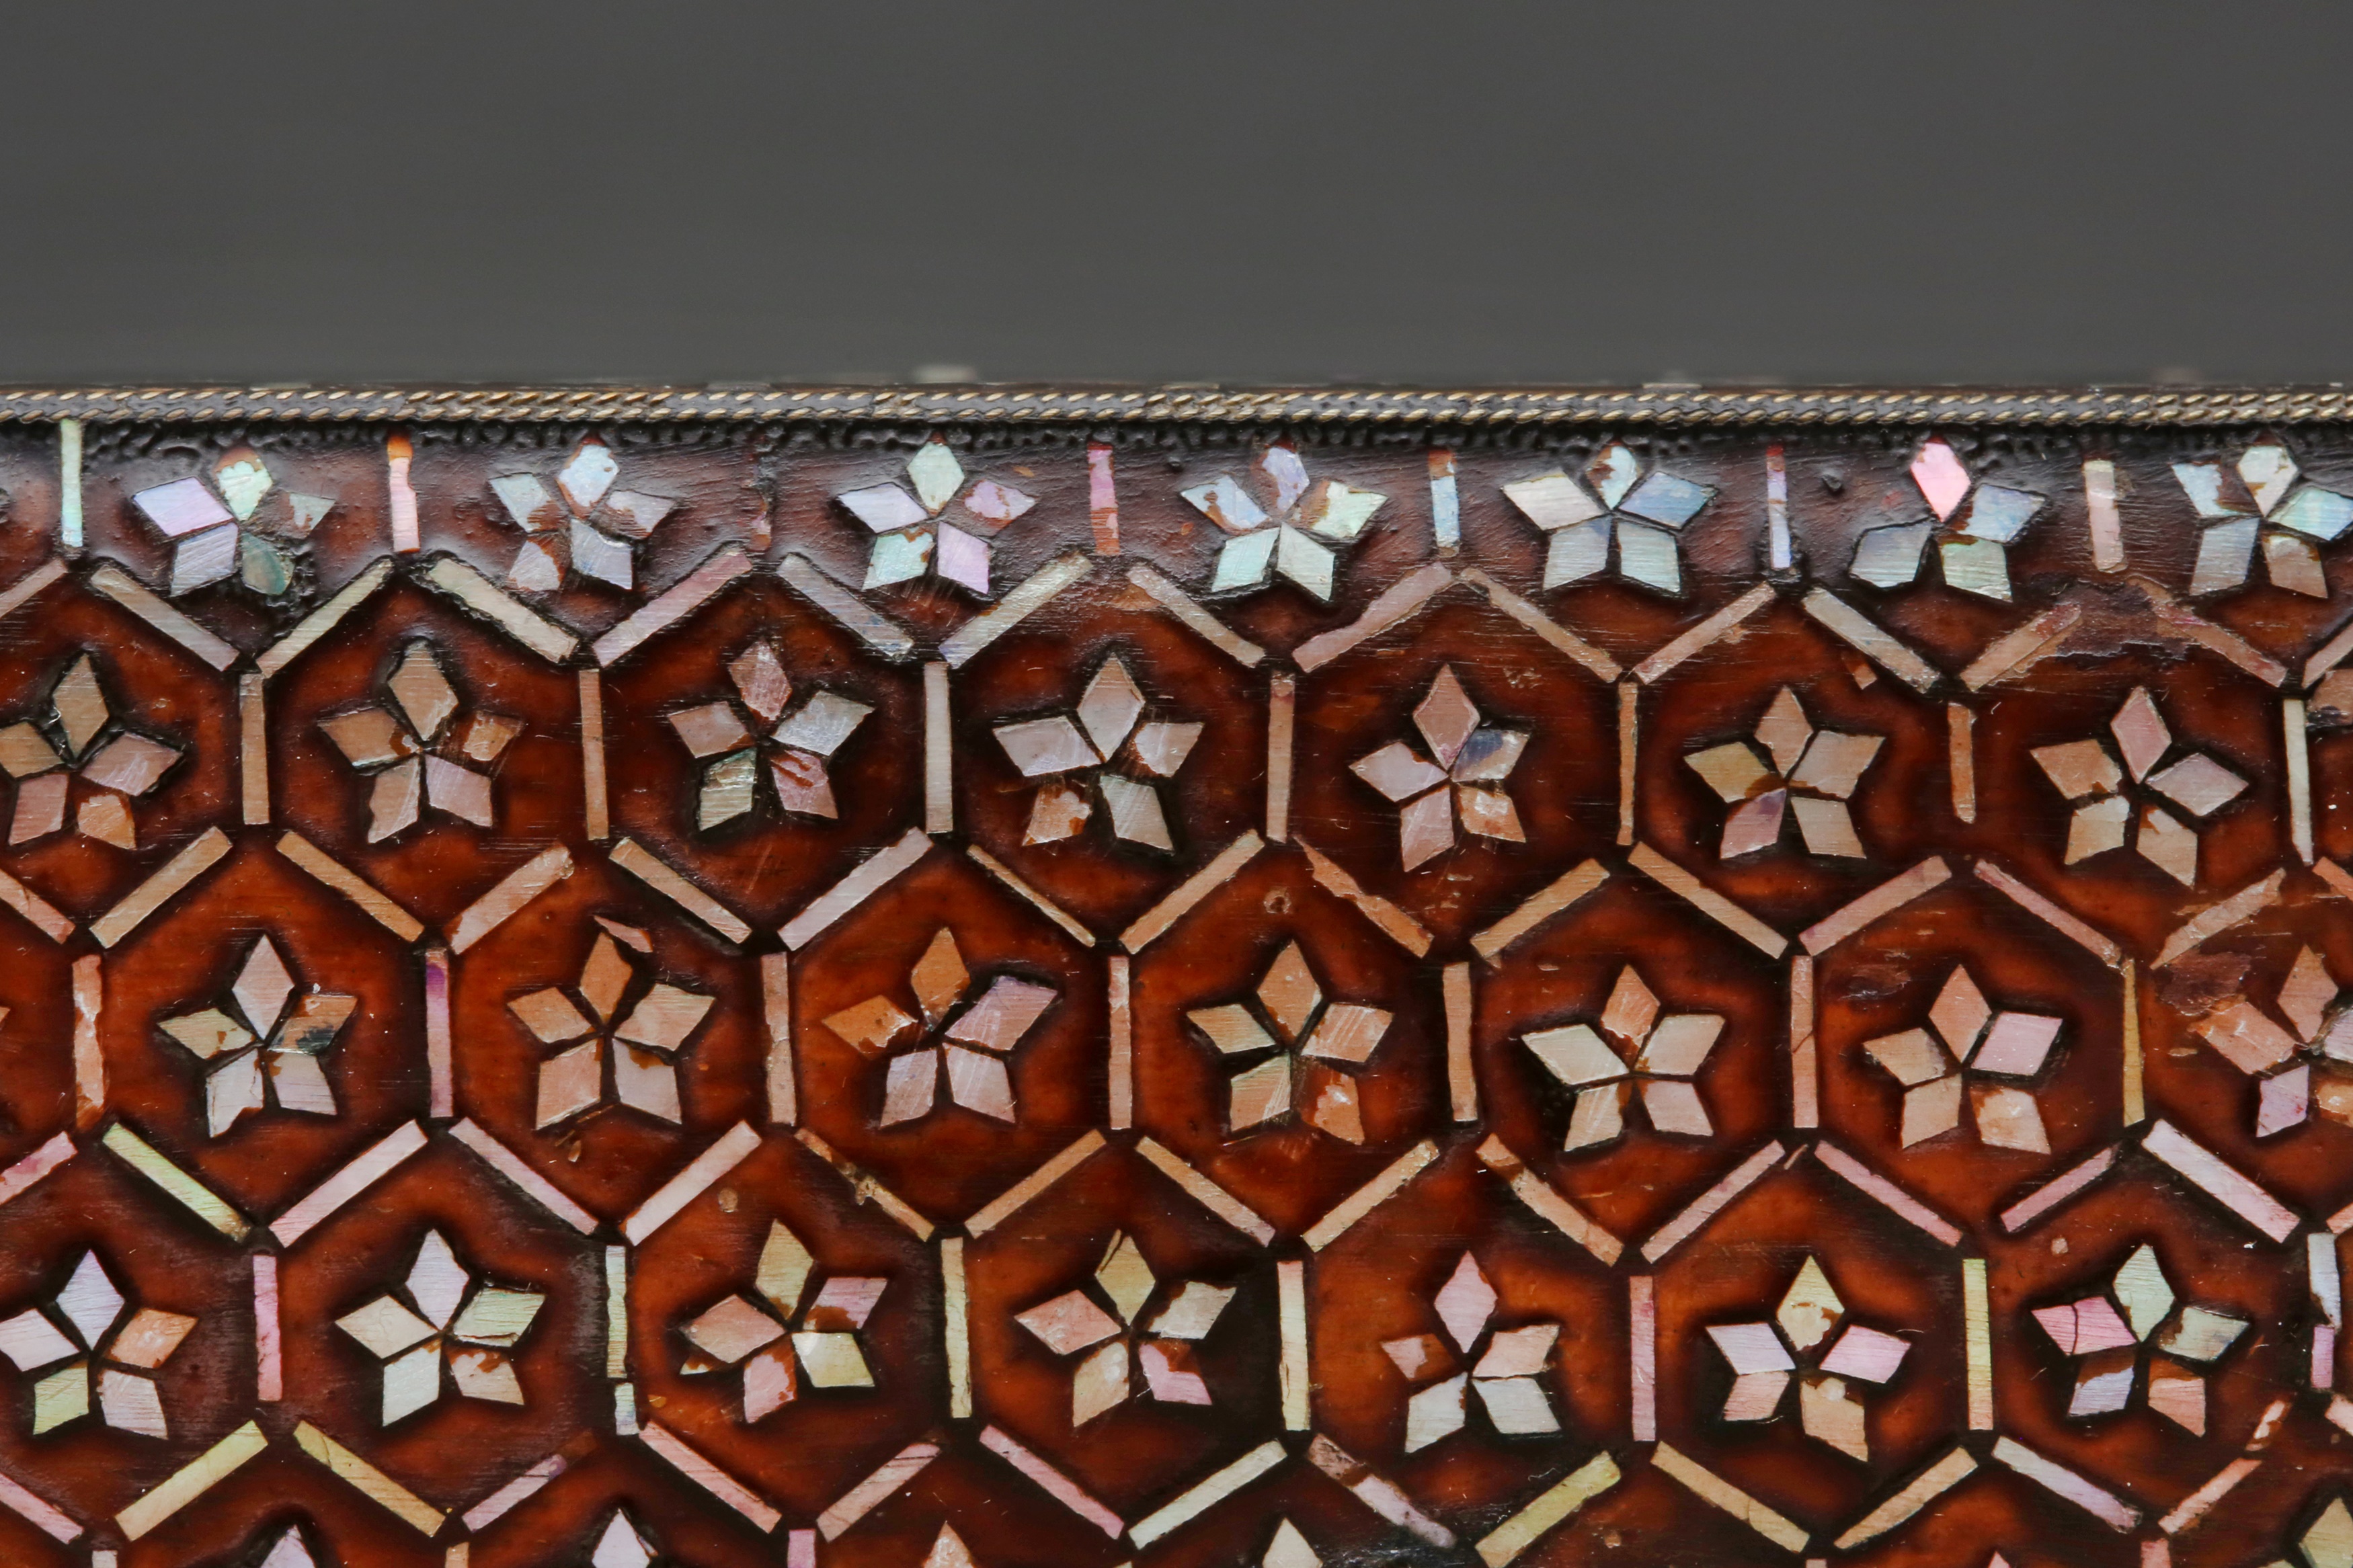 A JAPANESE RYUKYU ISLAND-STYLE MOTHER-OF-PEARL INLAID BLACK LACQUER BOX AND COVER - Image 5 of 7